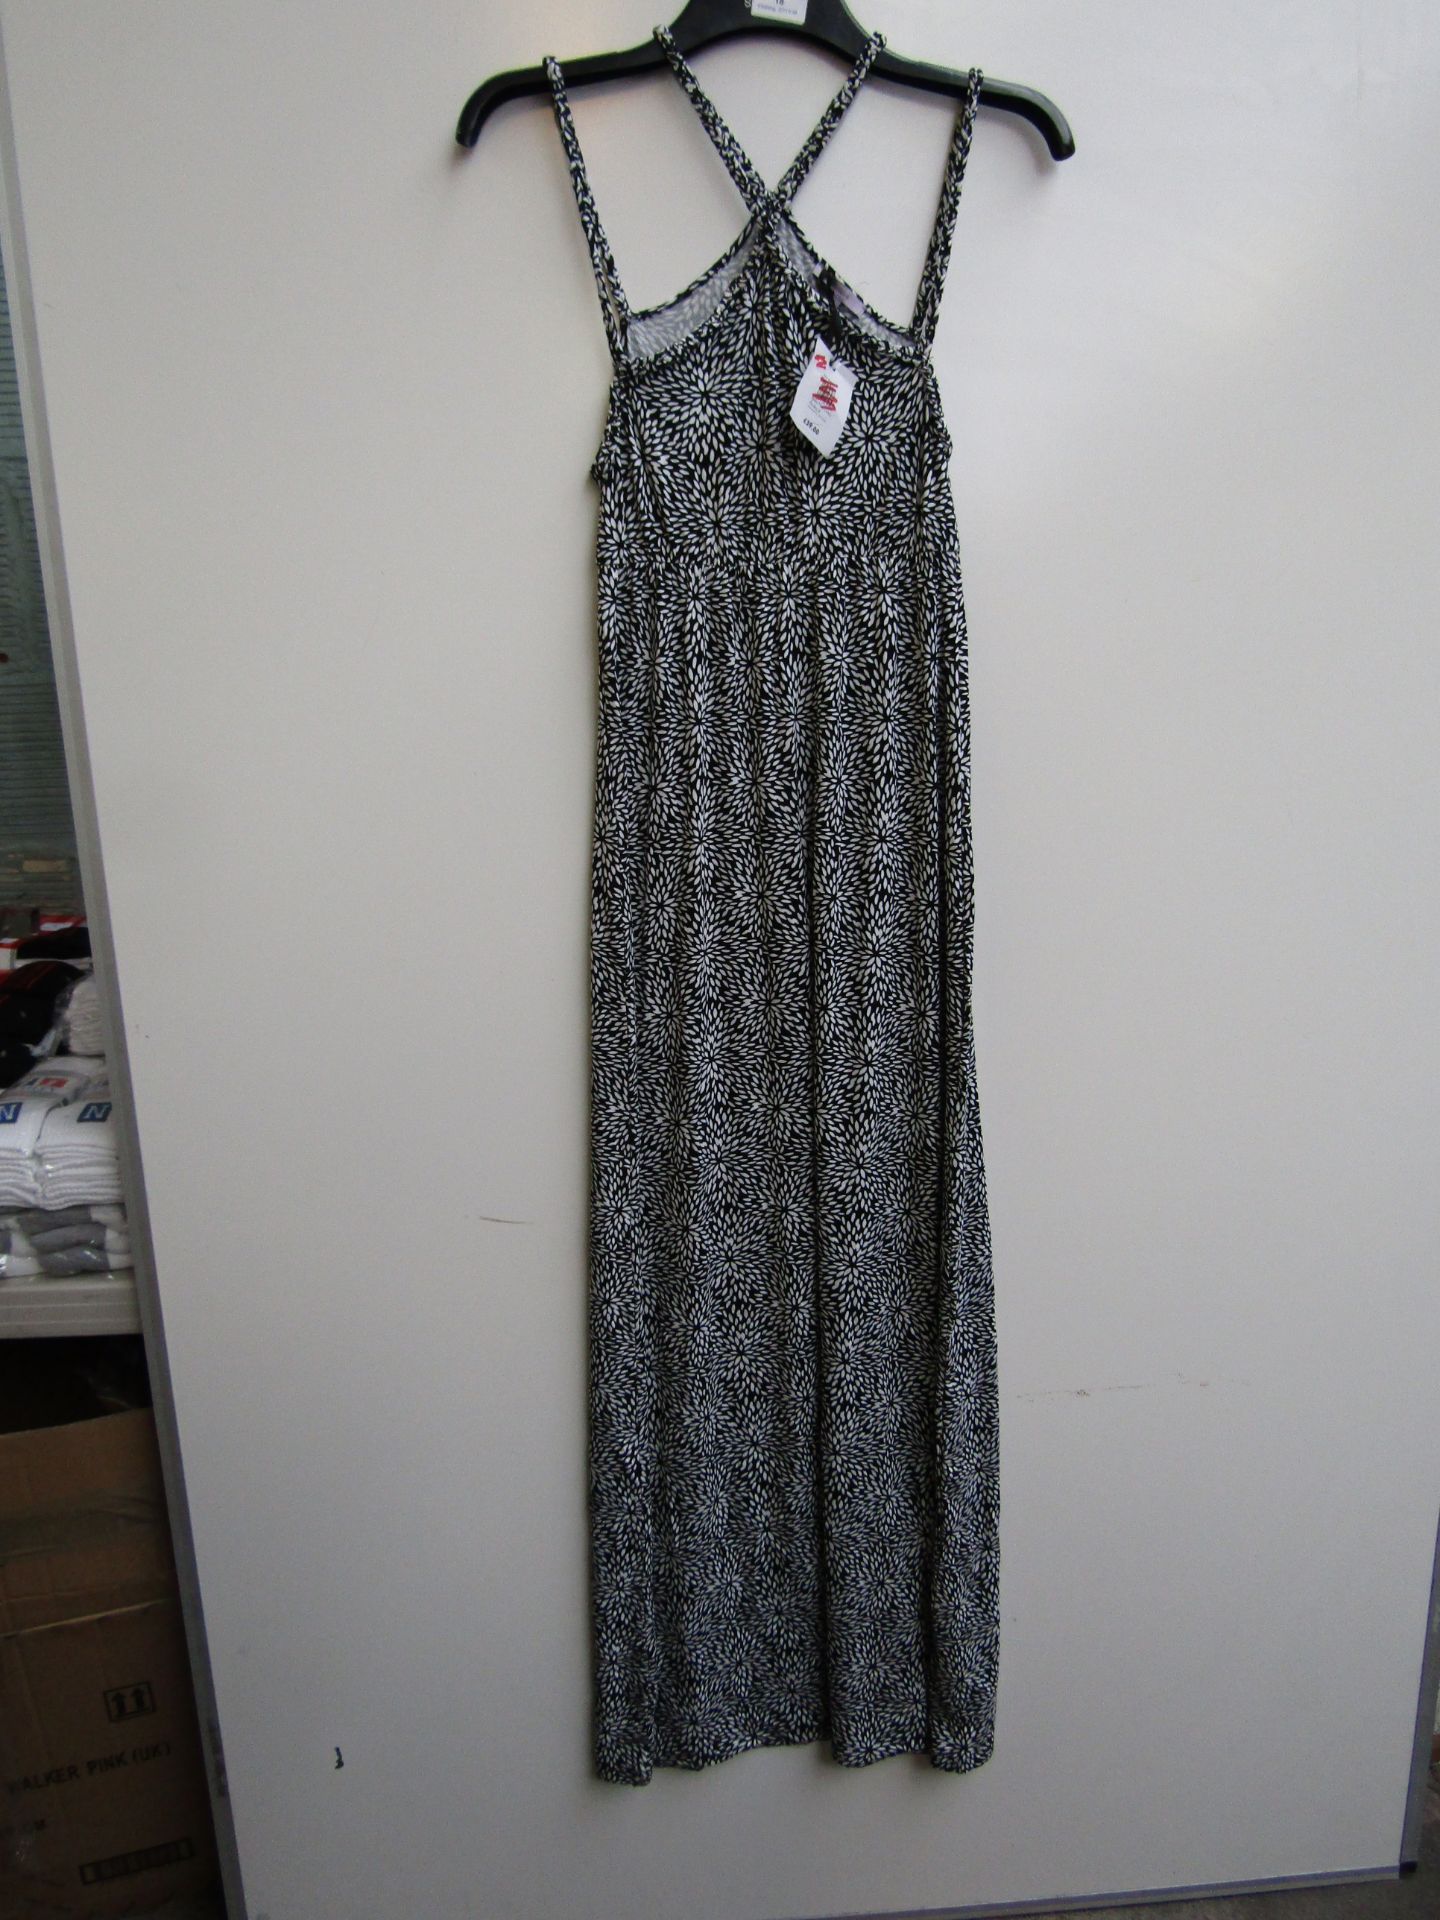 John Lewis Braid cross design Maxi dress, new with tag size 8, RRP £39